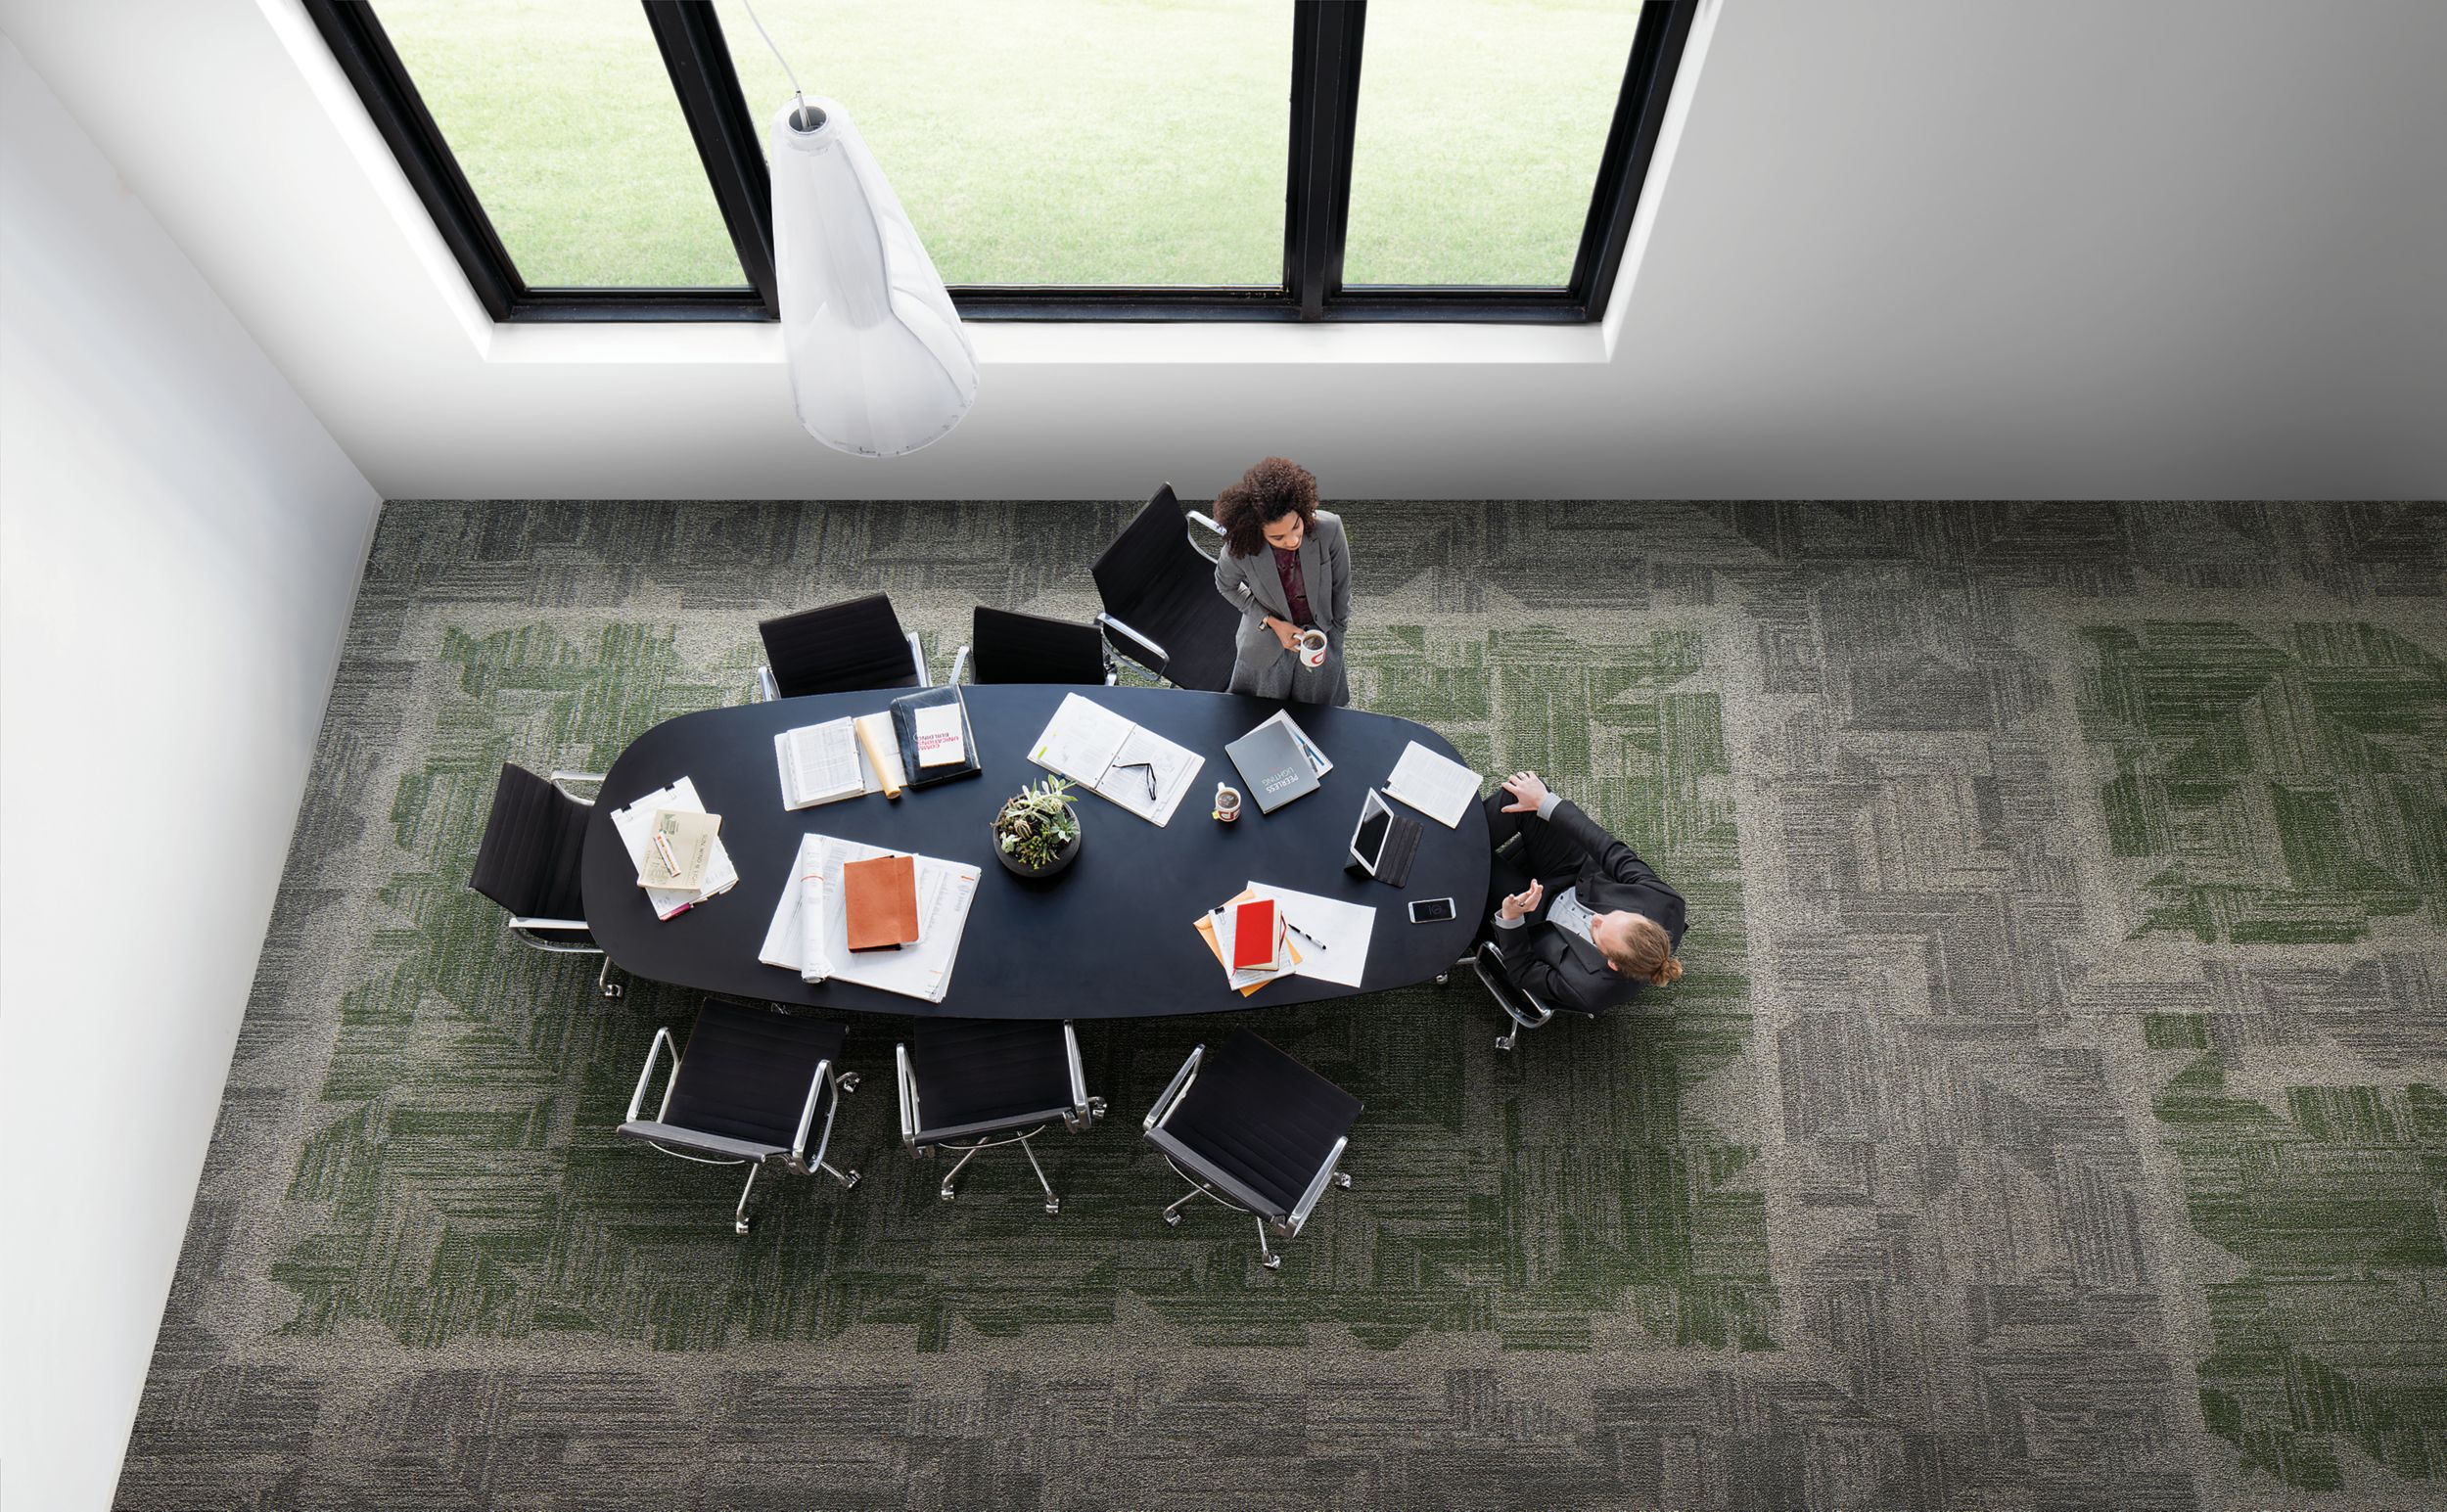 Interface Open Air 403 carpet tile in overhead view of meeting table with man and woman talking afbeeldingnummer 1